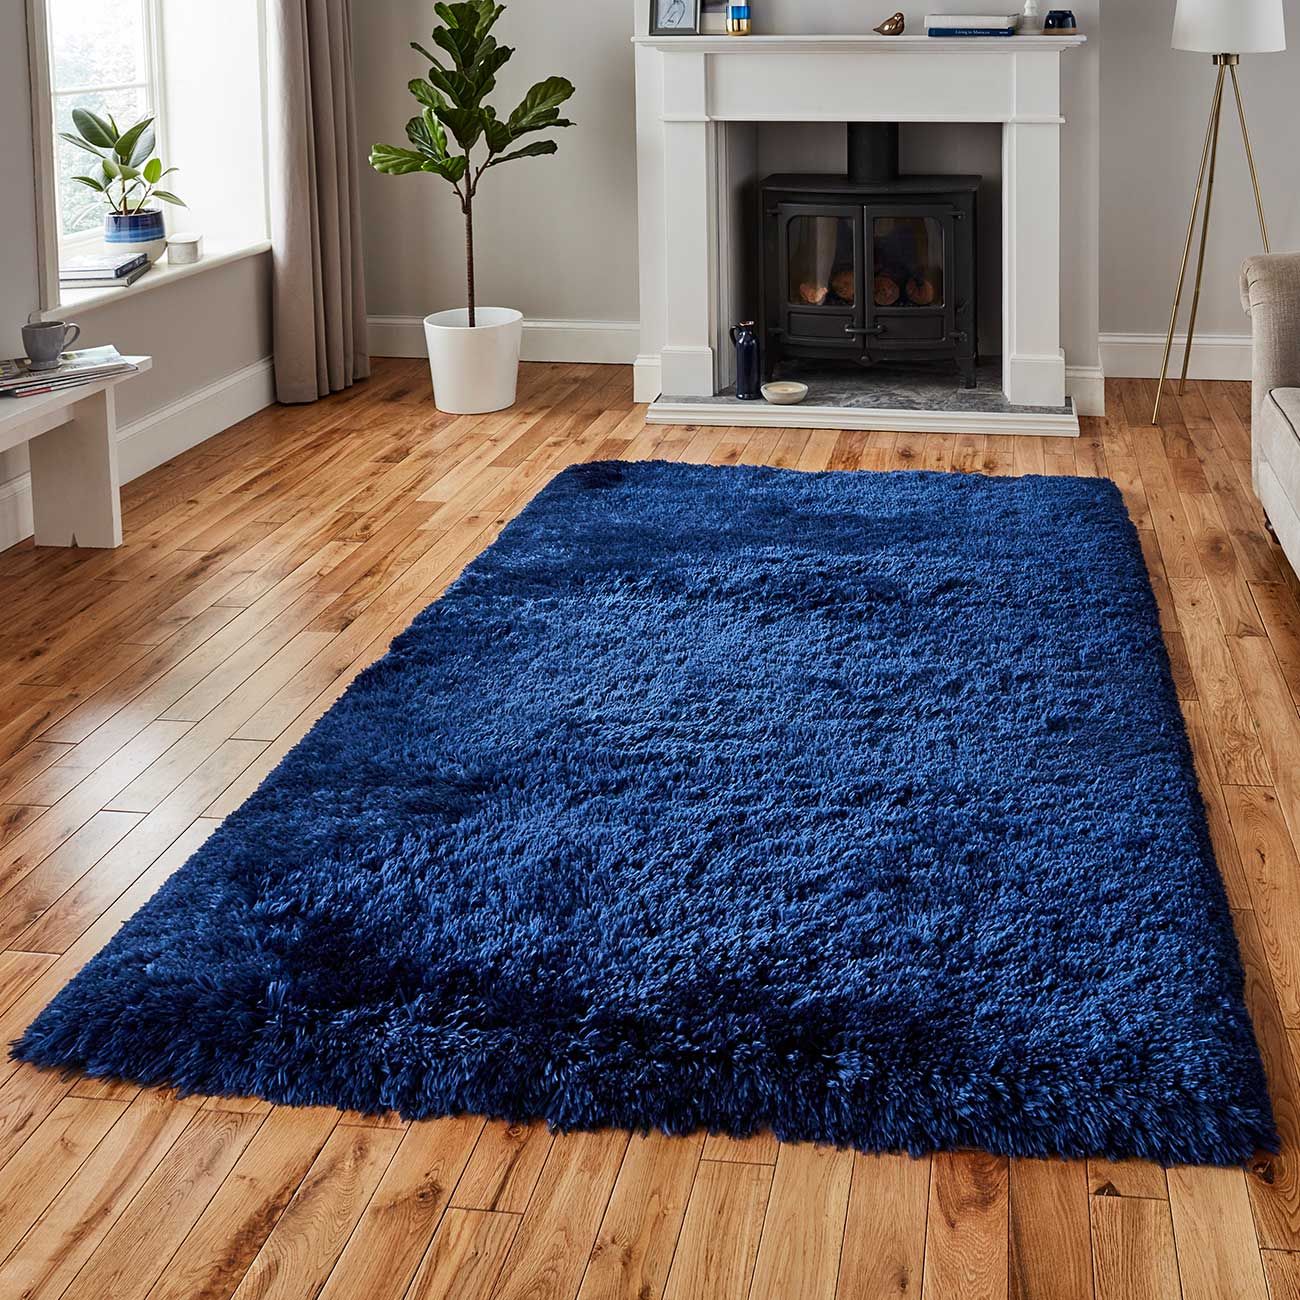 Soft Touch Shaggy Navy Blue Thick Luxurious Soft 5cm Dense Pile Rug Available in 9 Sizes 50cm x 80cm 